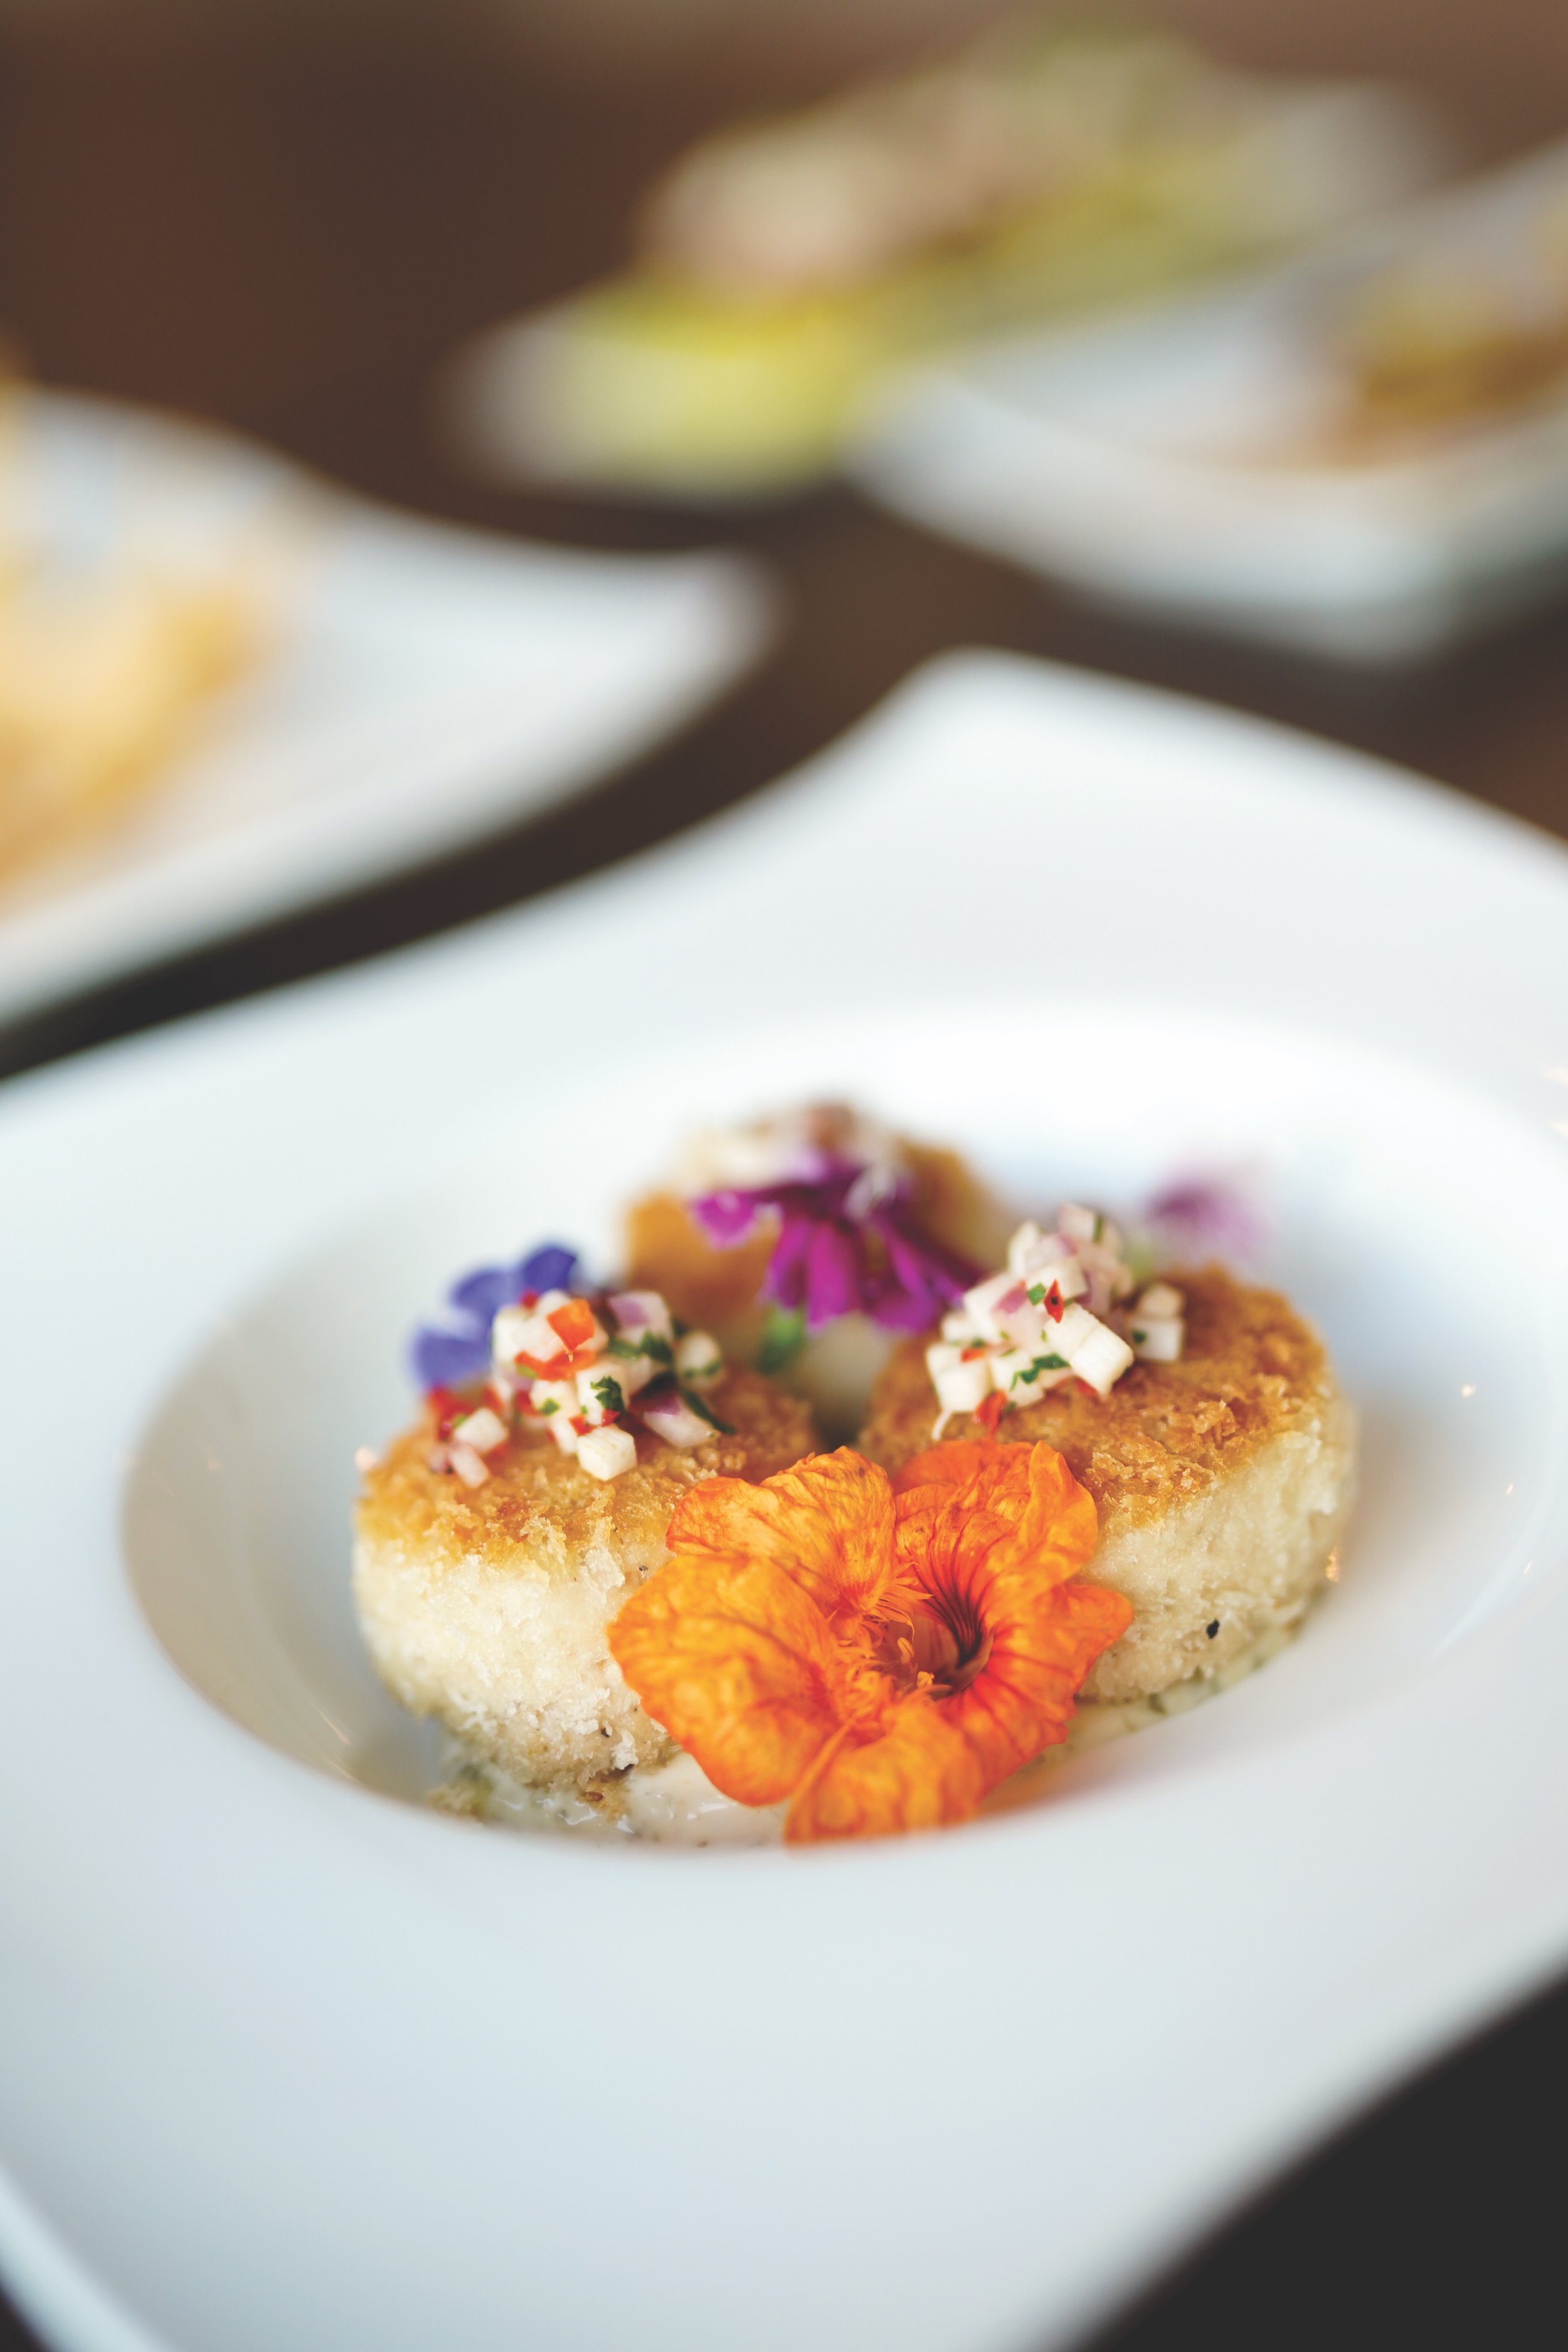  Gorgeous crusted scallops with edible flowers is just one of the many picturesque menu items at MW Restaurant. 